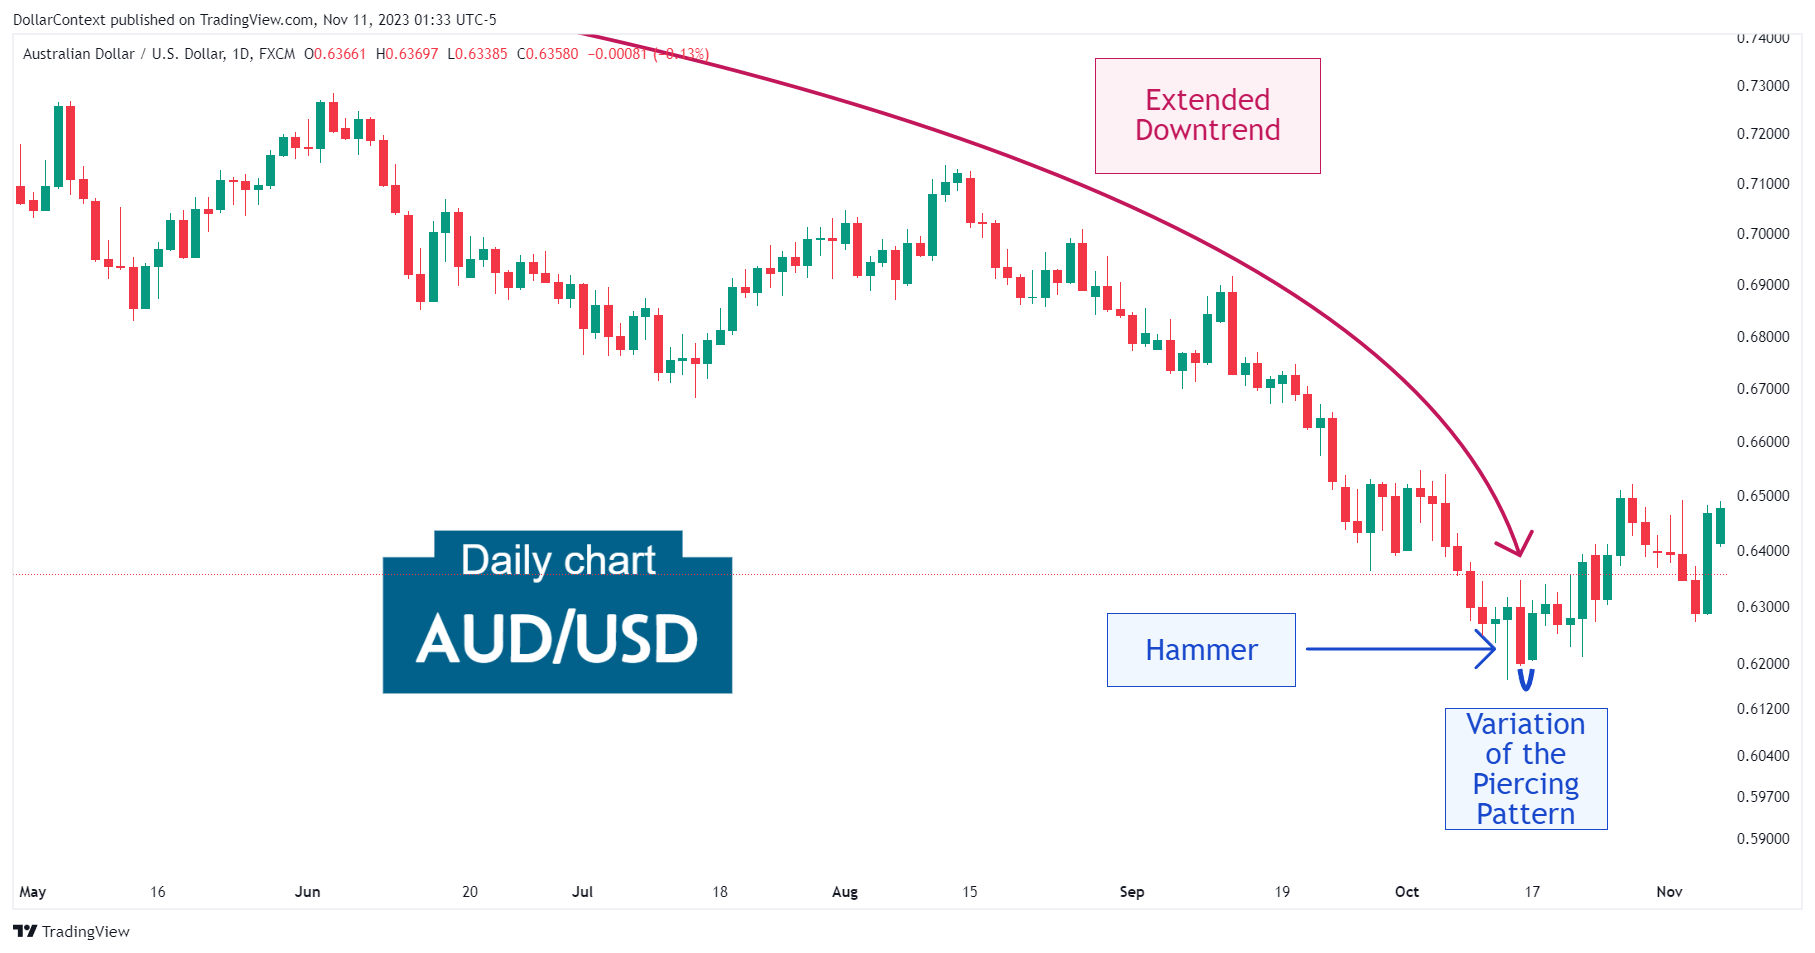 AUD/USD: Hammer and Piercing Pattern in October 2022 (Daily Chart)